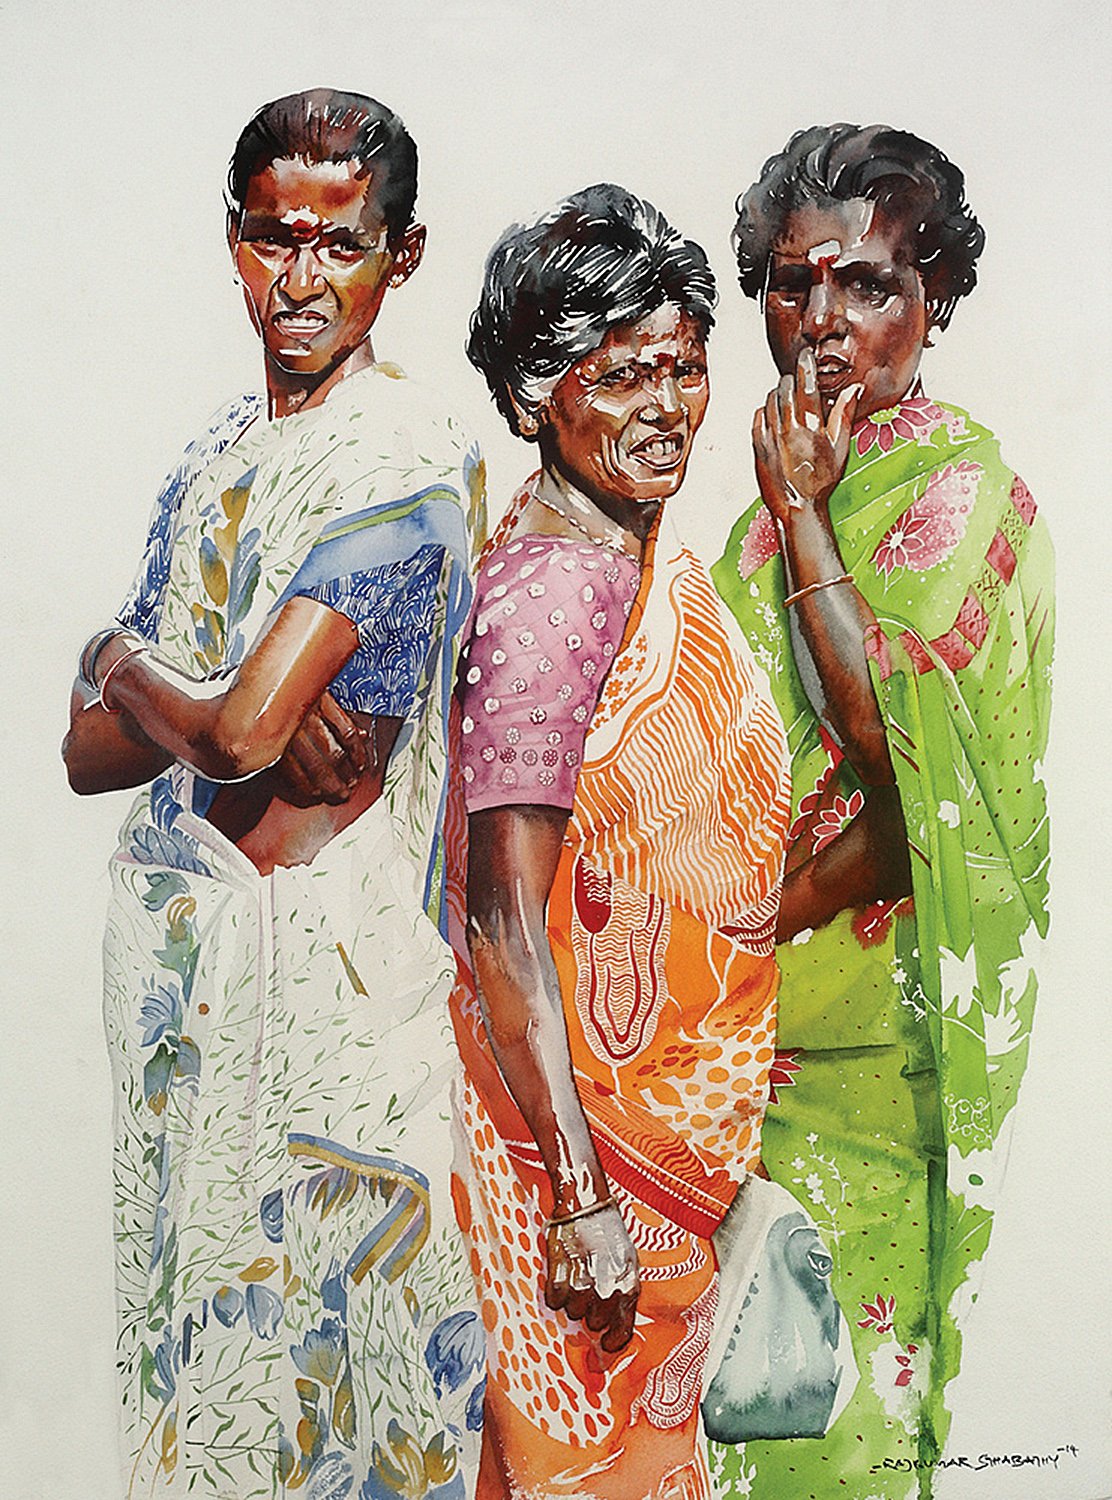 Mothers'|R. Rajkumar Sthabathy- Water Color on Paper, 2014, 30 x 22 inches